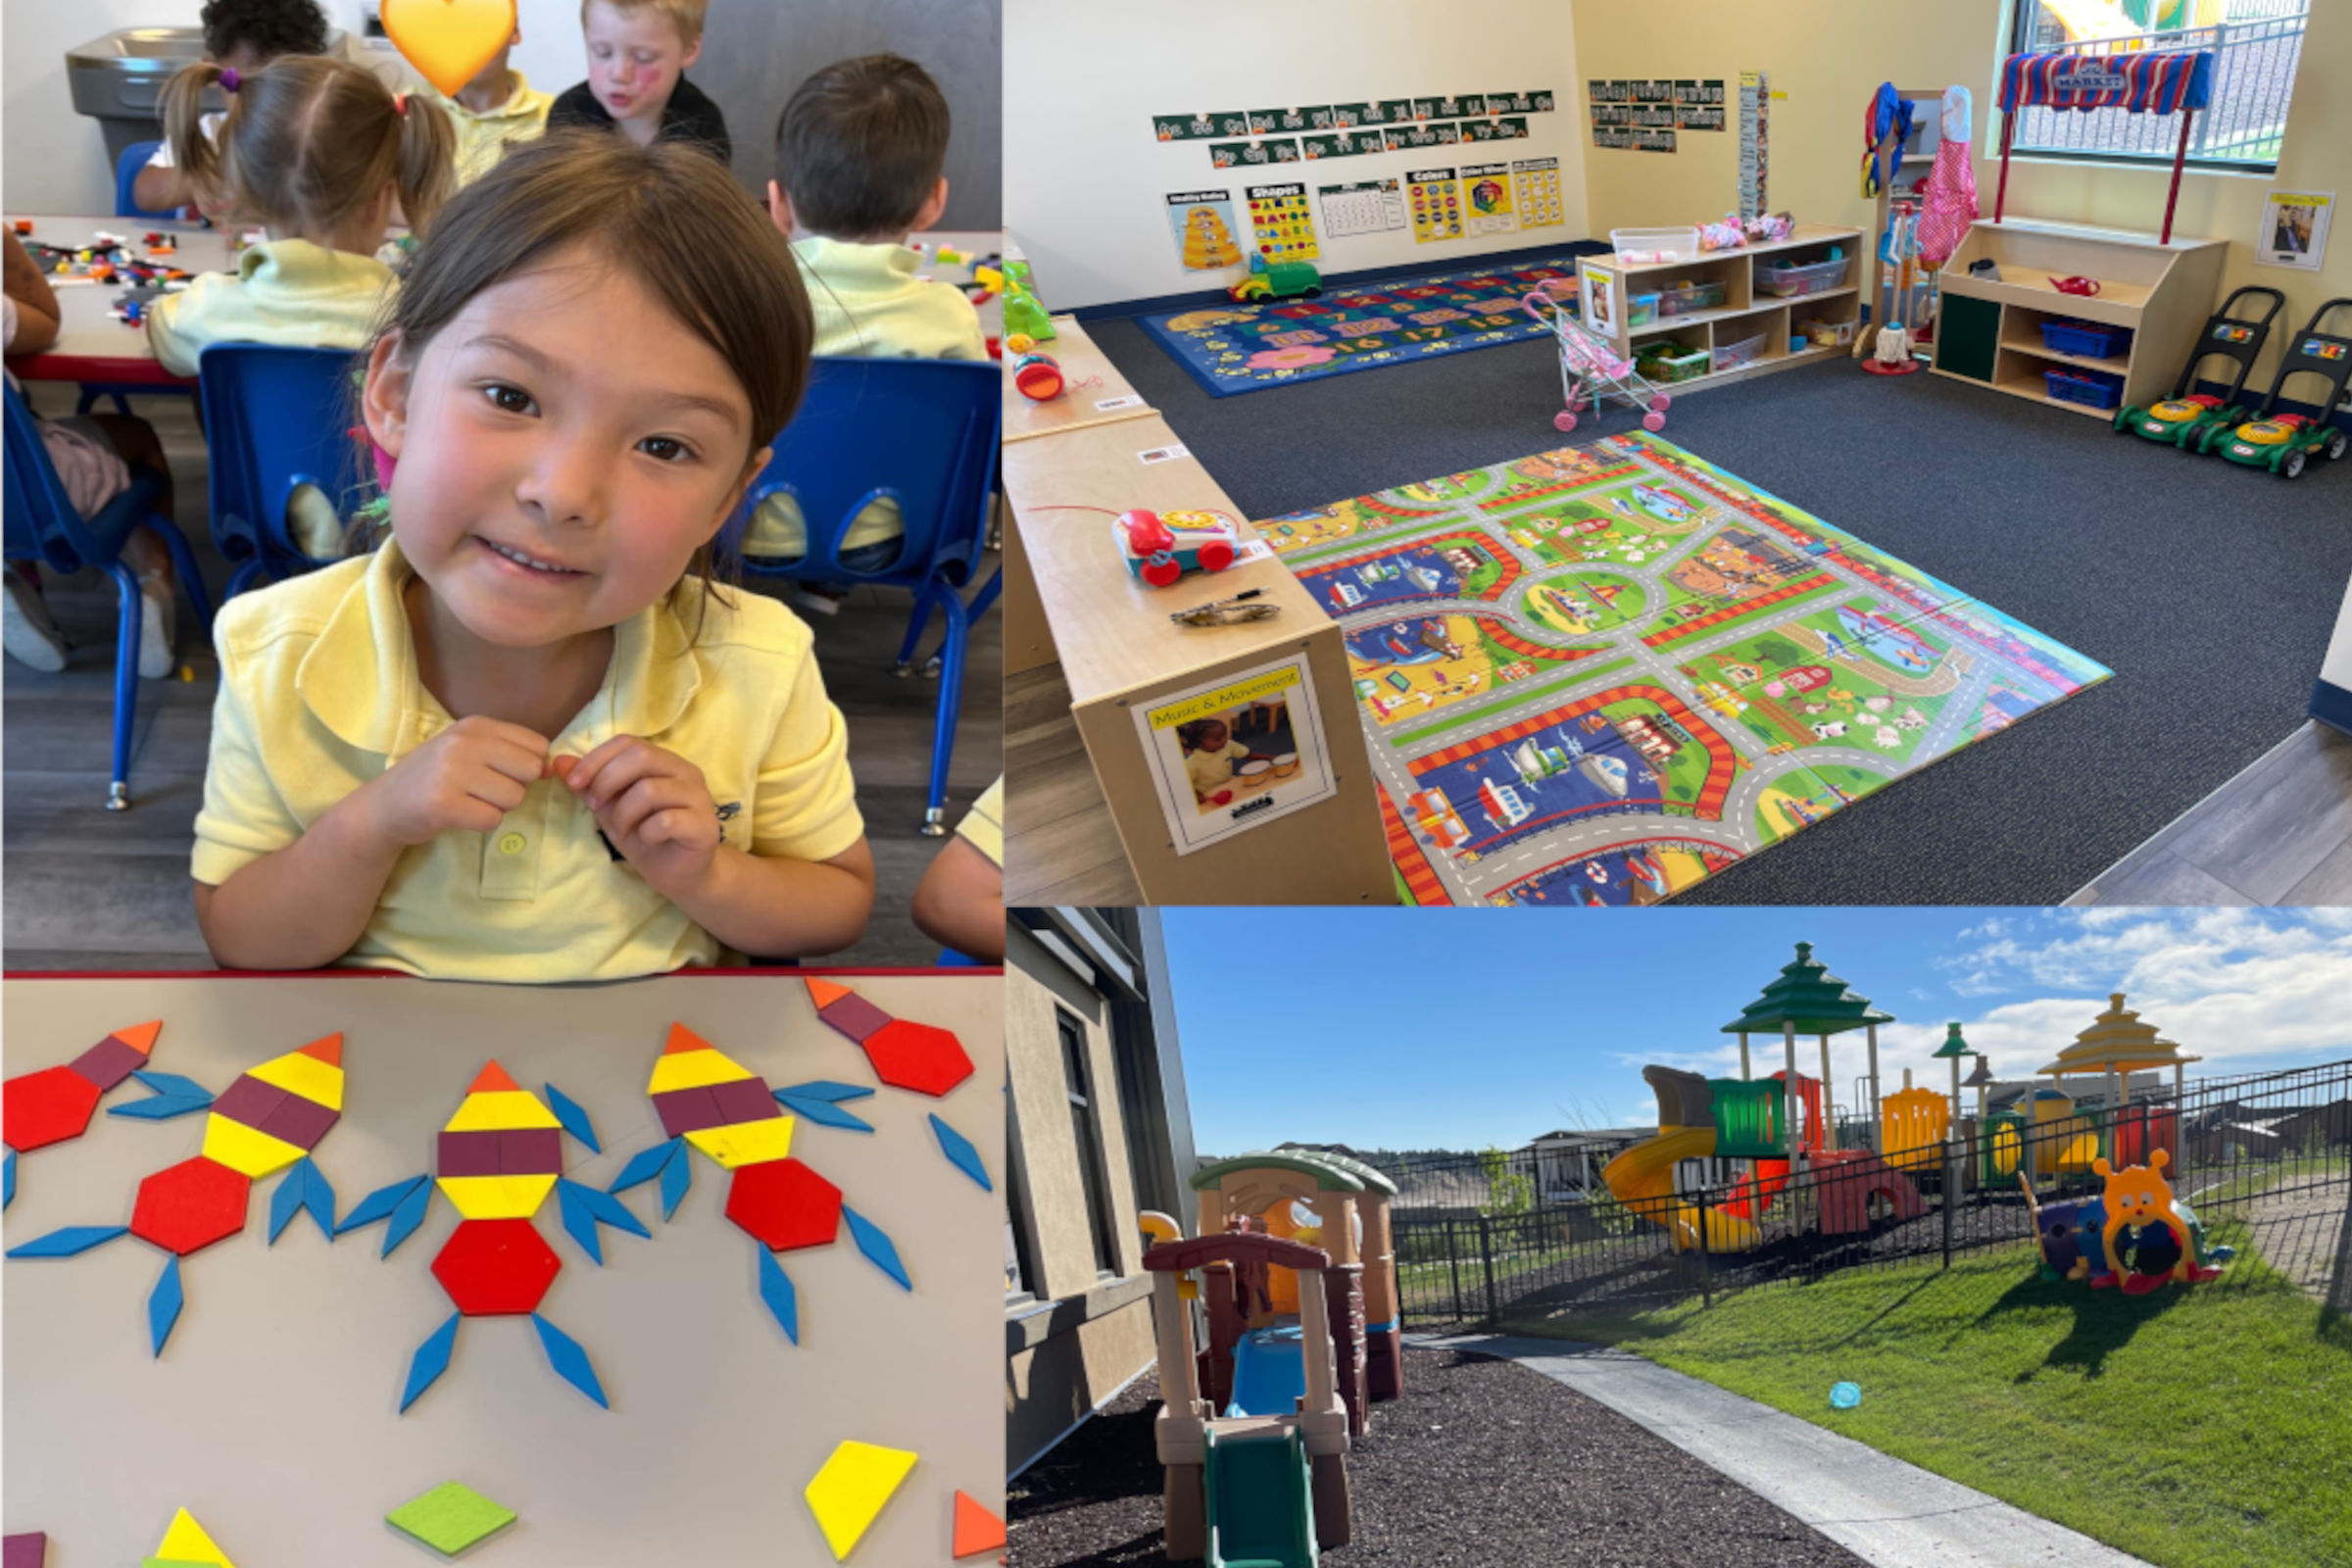 Kid City USA in Austin, TX: Daycare, preschool excellence! Explore a happy student, cozy infant room, playful playground, and delightful crafts.